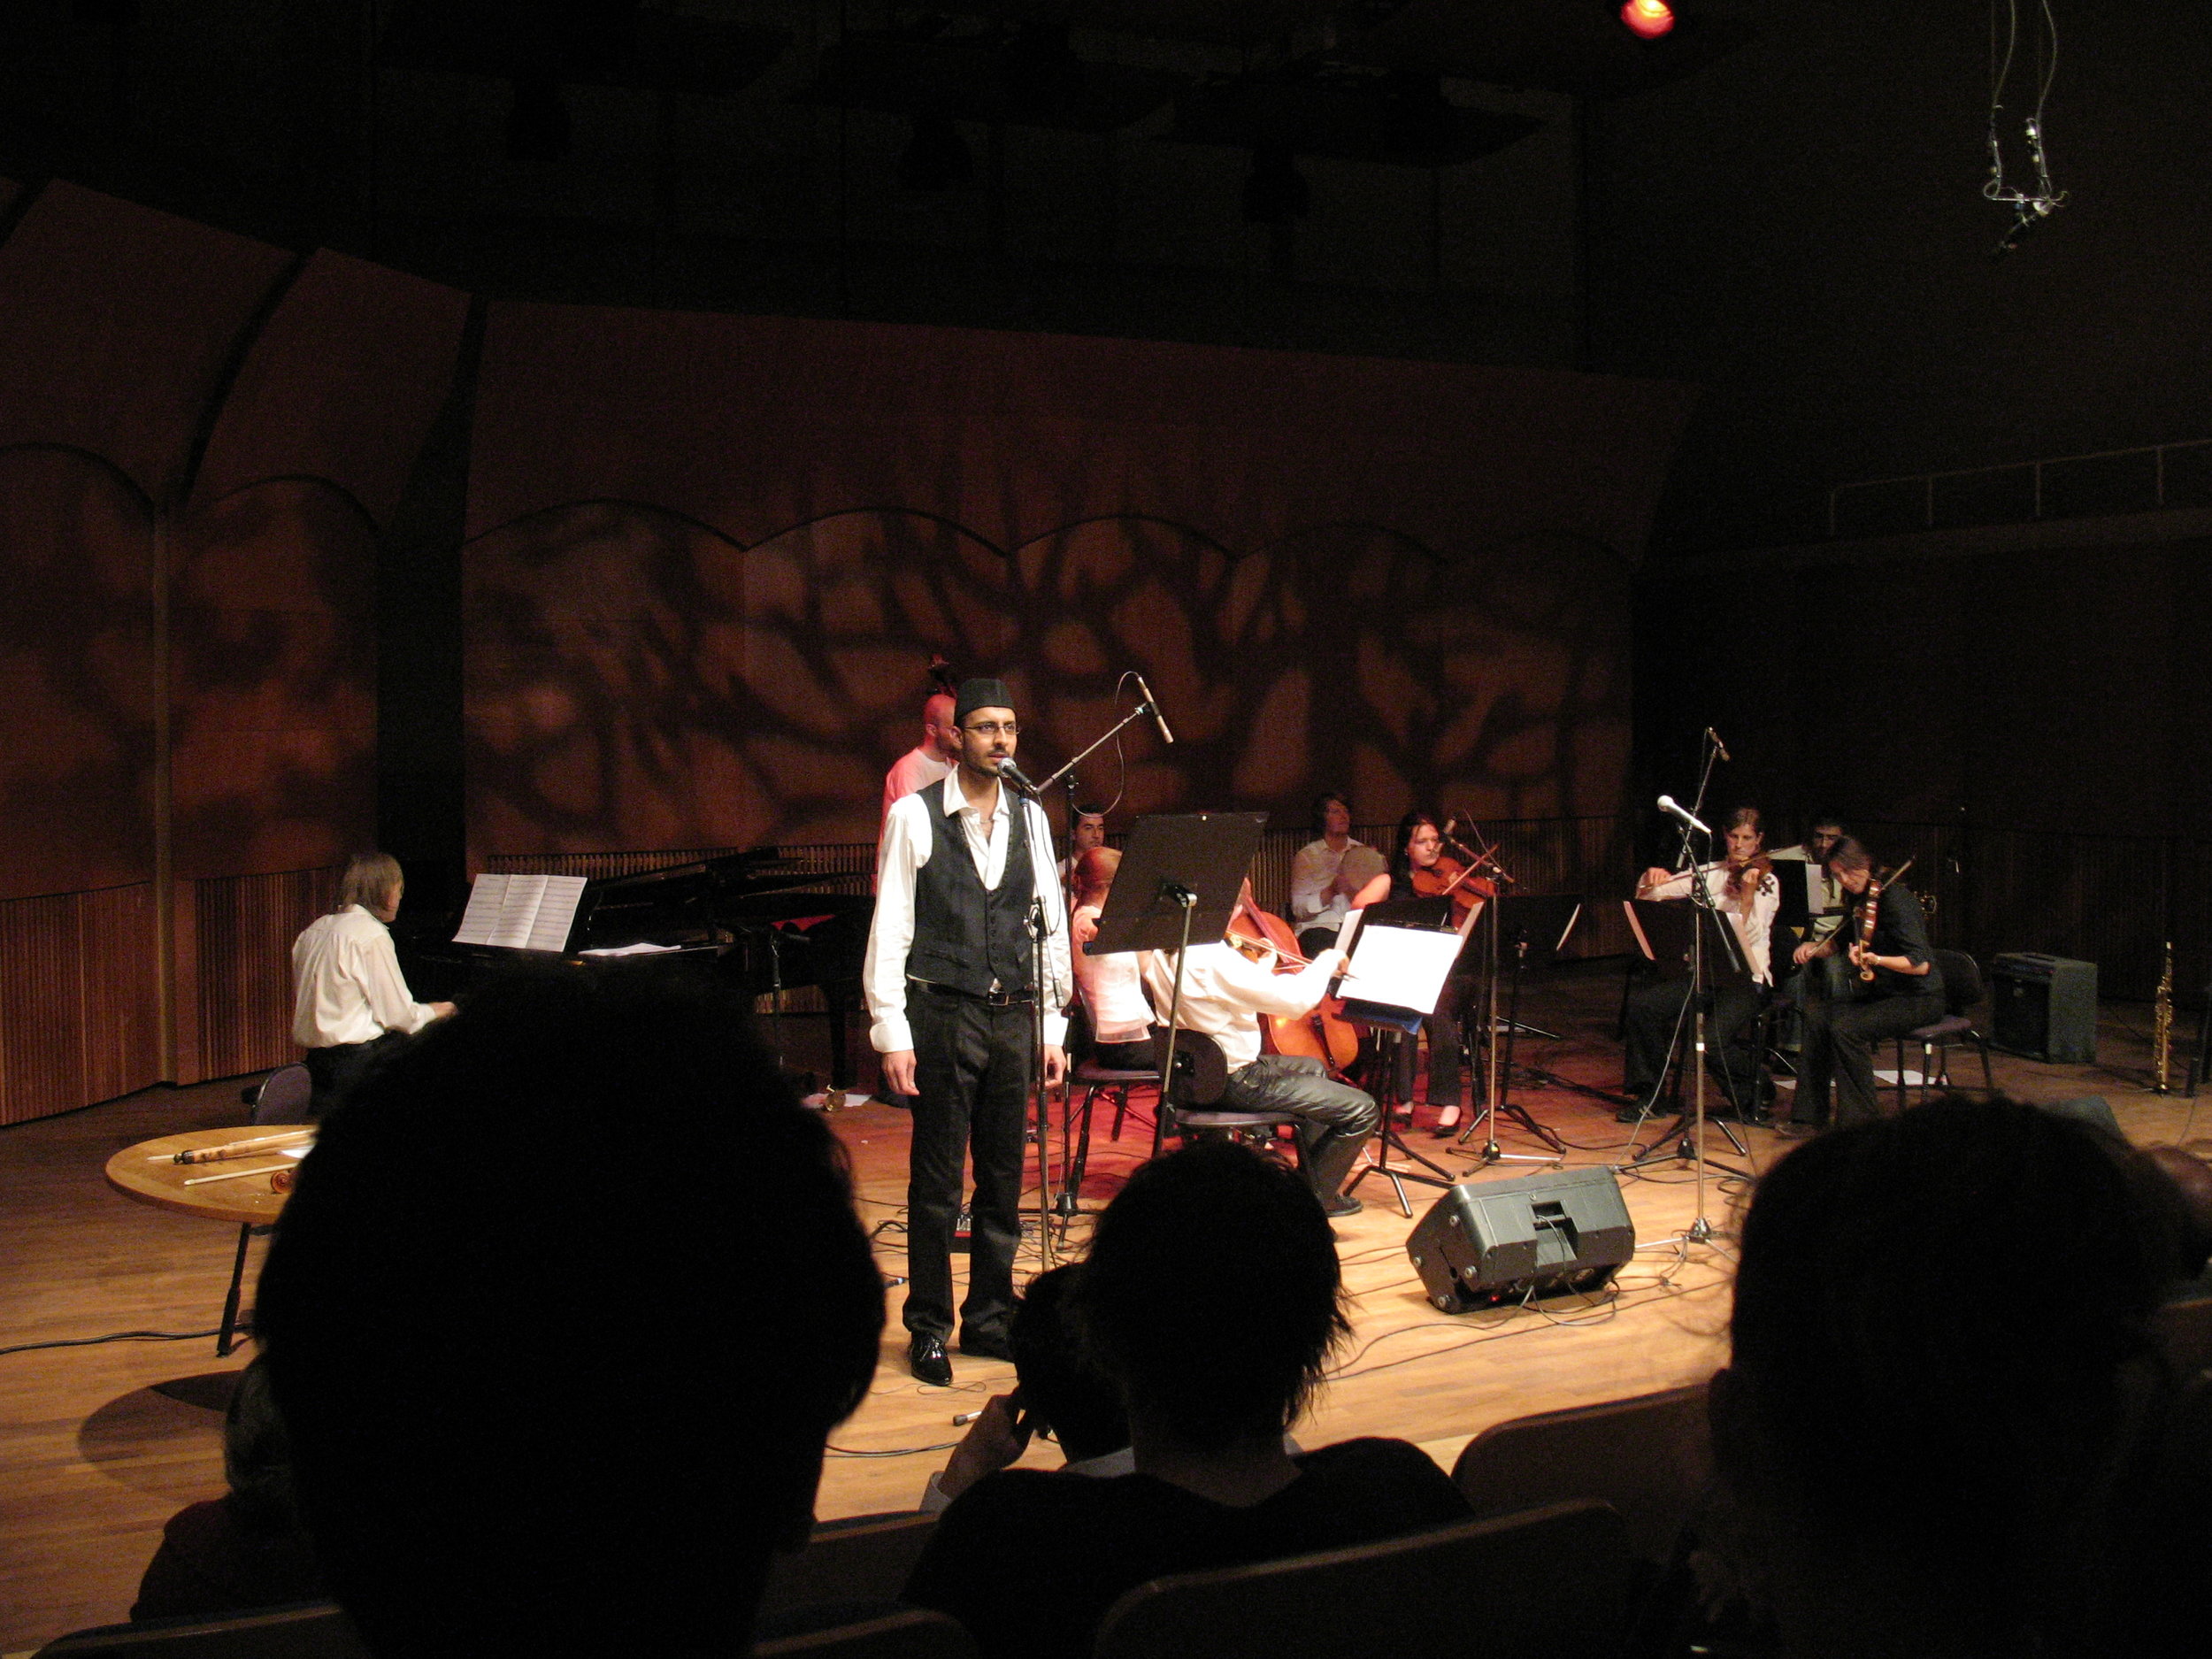 Pictures from the examination concert 053.jpg